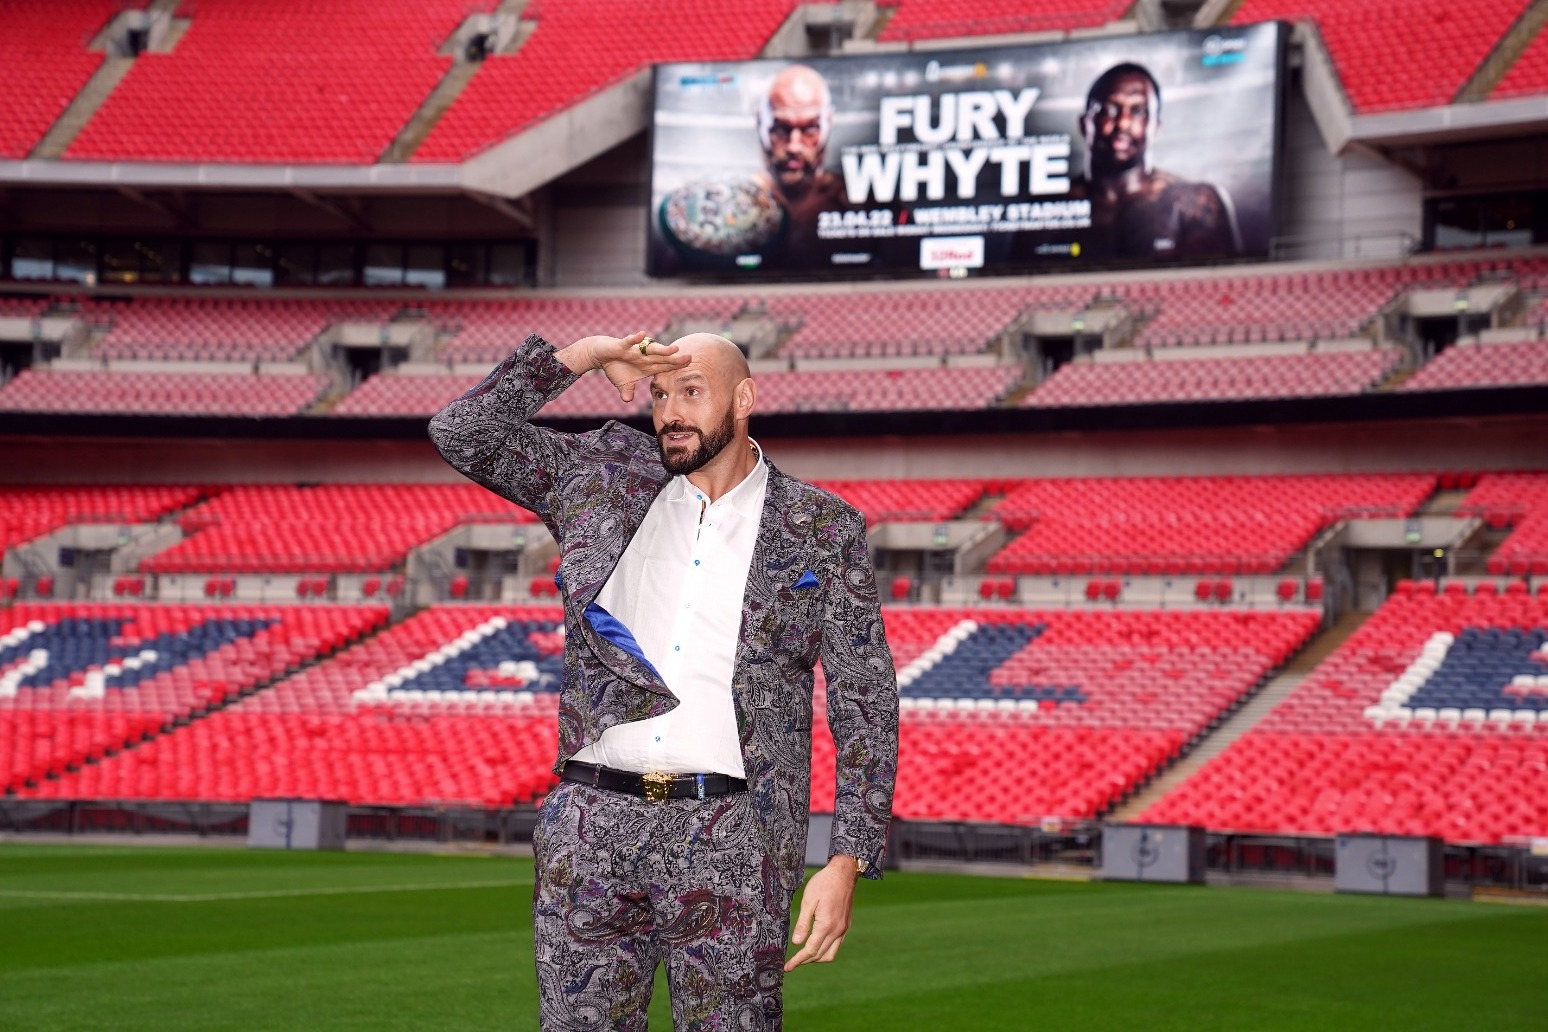 Frank Bruno warns Tyson Fury he faces ‘awkward’ fight with Dillian Whyte 